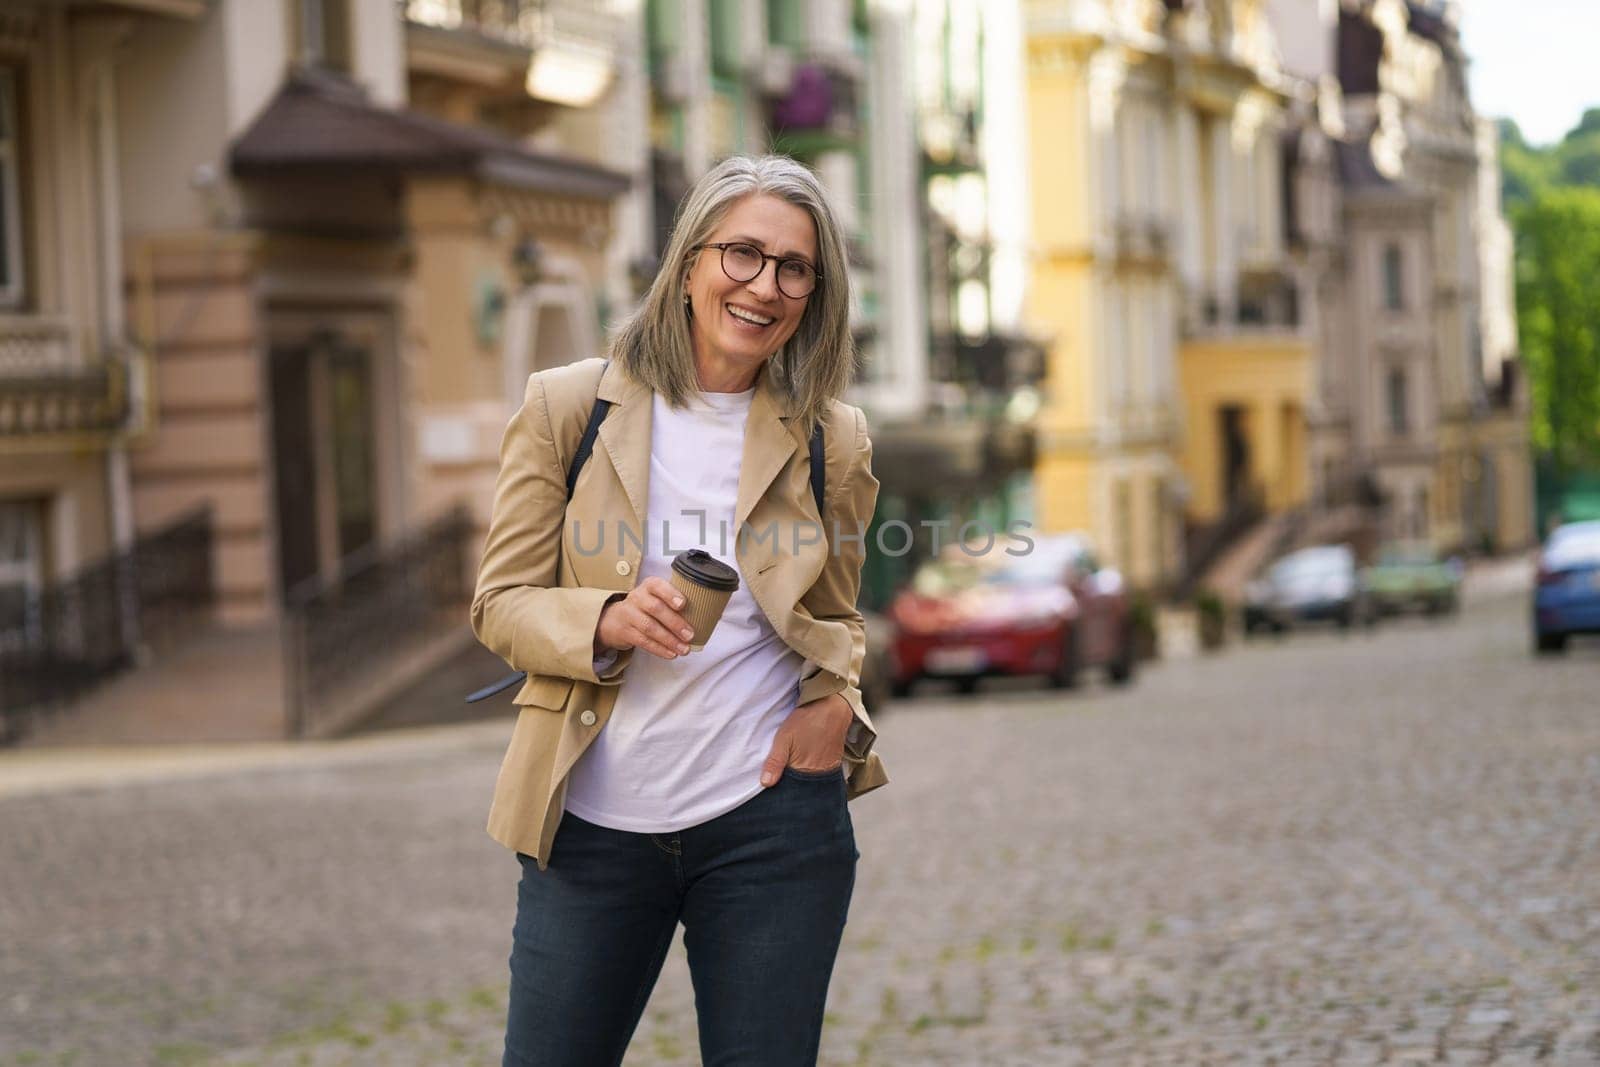 mature woman with a cheerful smile holding a phone while exploring an old European city. The photo captures the concept of elderly happiness and technology use for communication and travel purposes. by LipikStockMedia